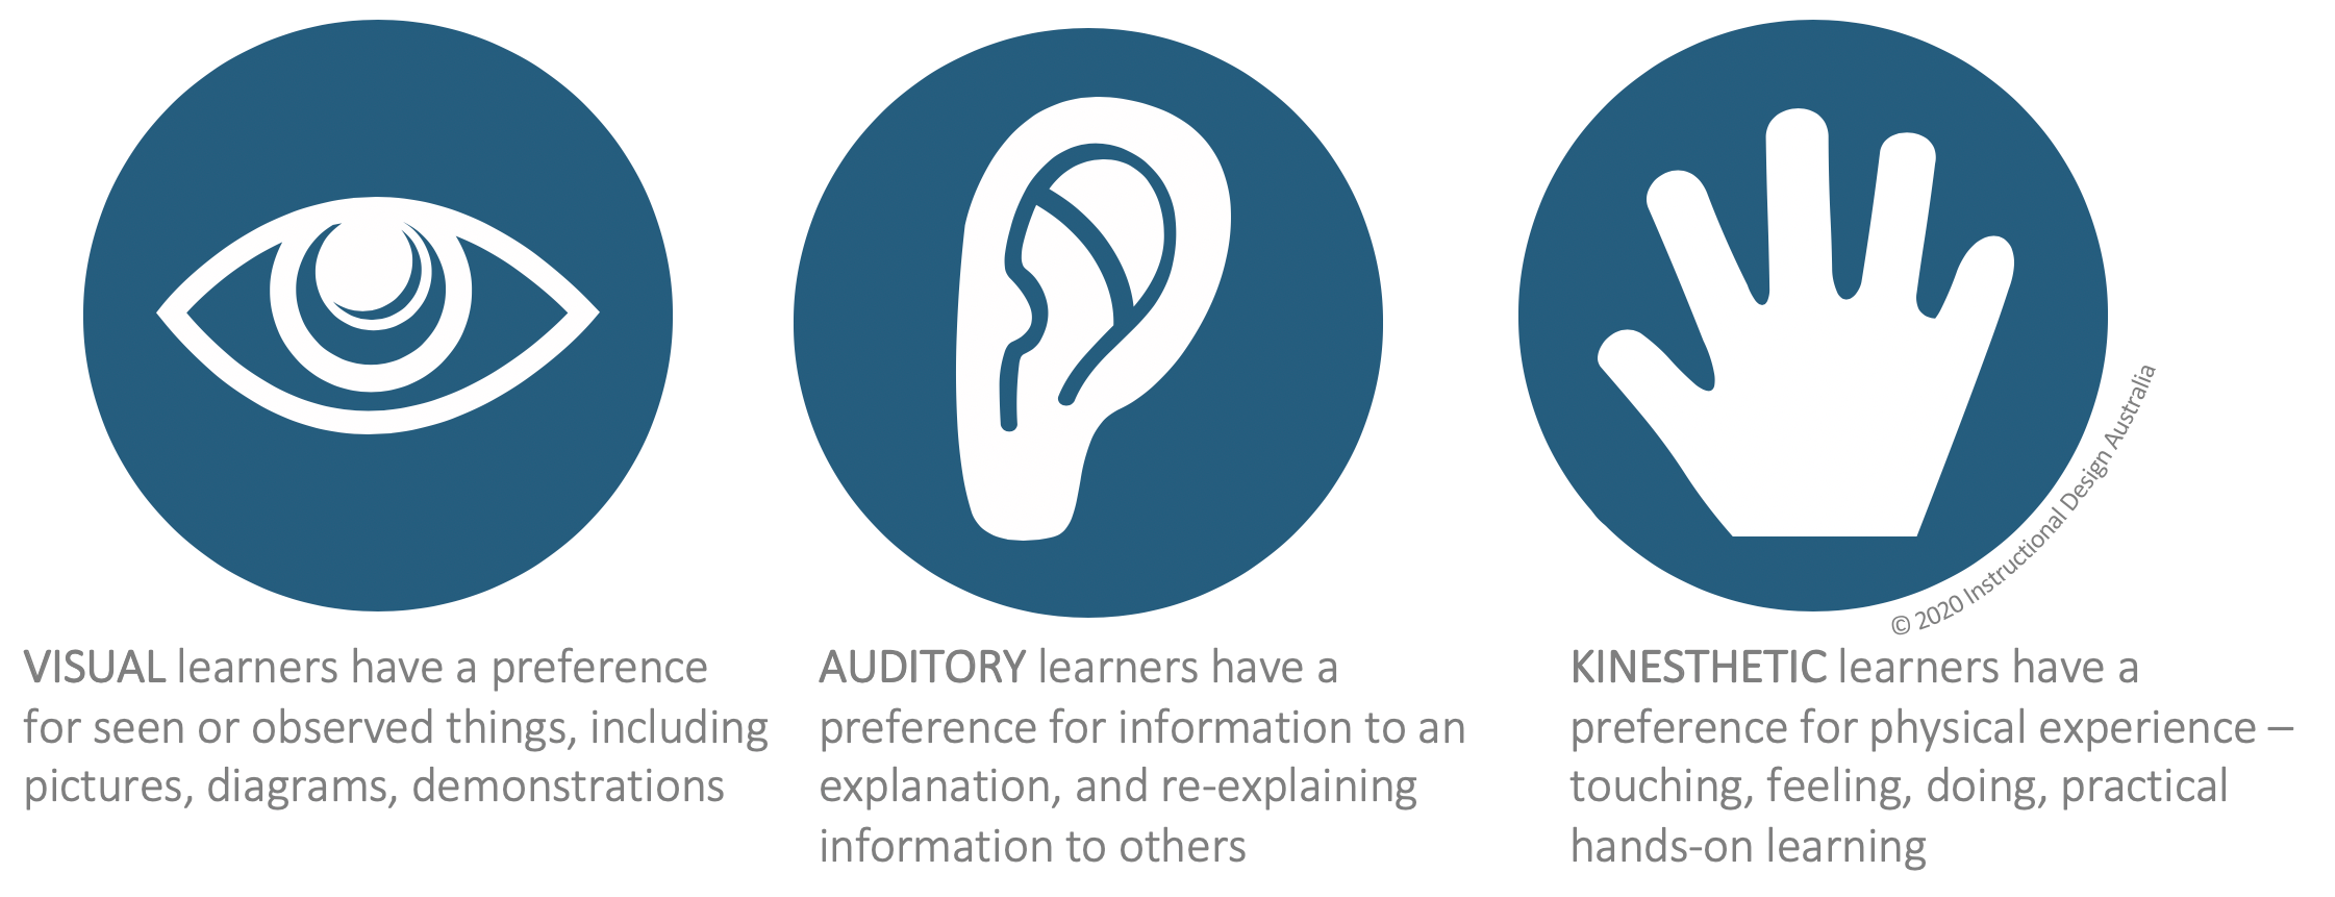 visual learner or auditory learner